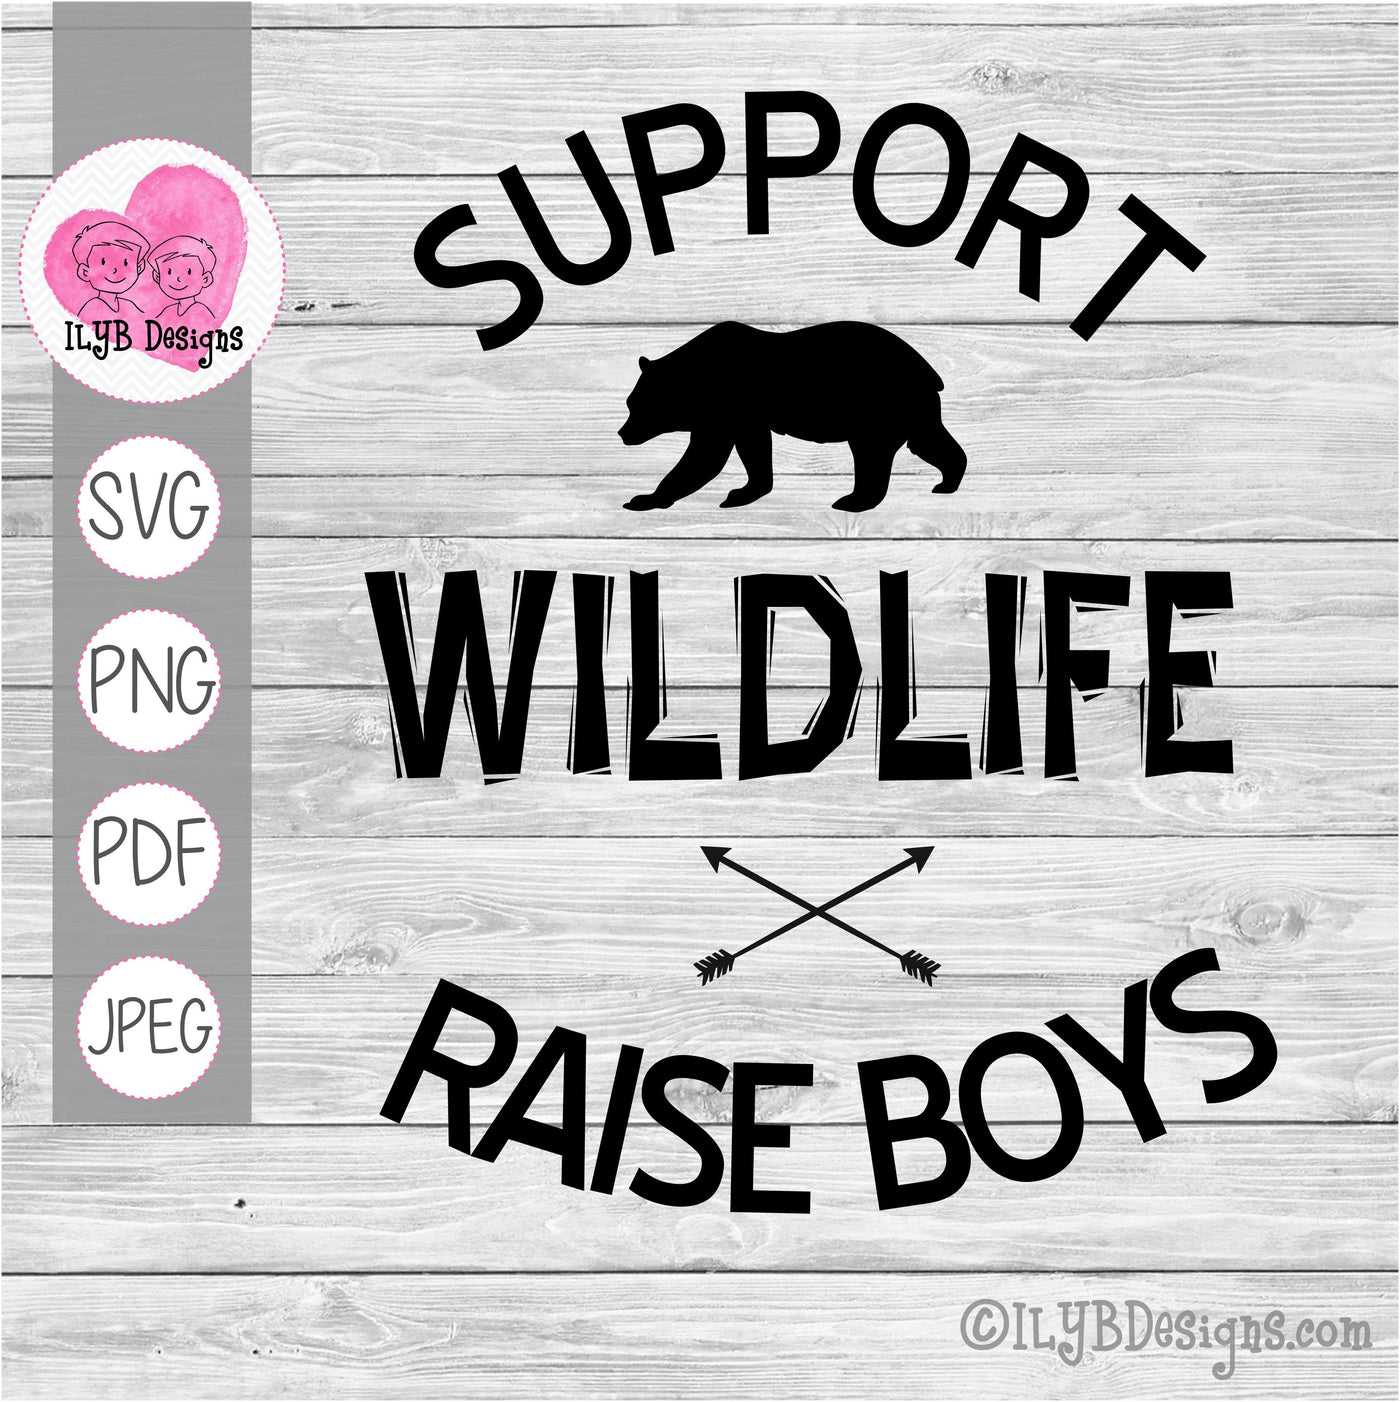 Support Wildlife Raise Boys with Bear and Arrows SVG, PNG, JPEG, PDF Cut Files - ILYB Designs